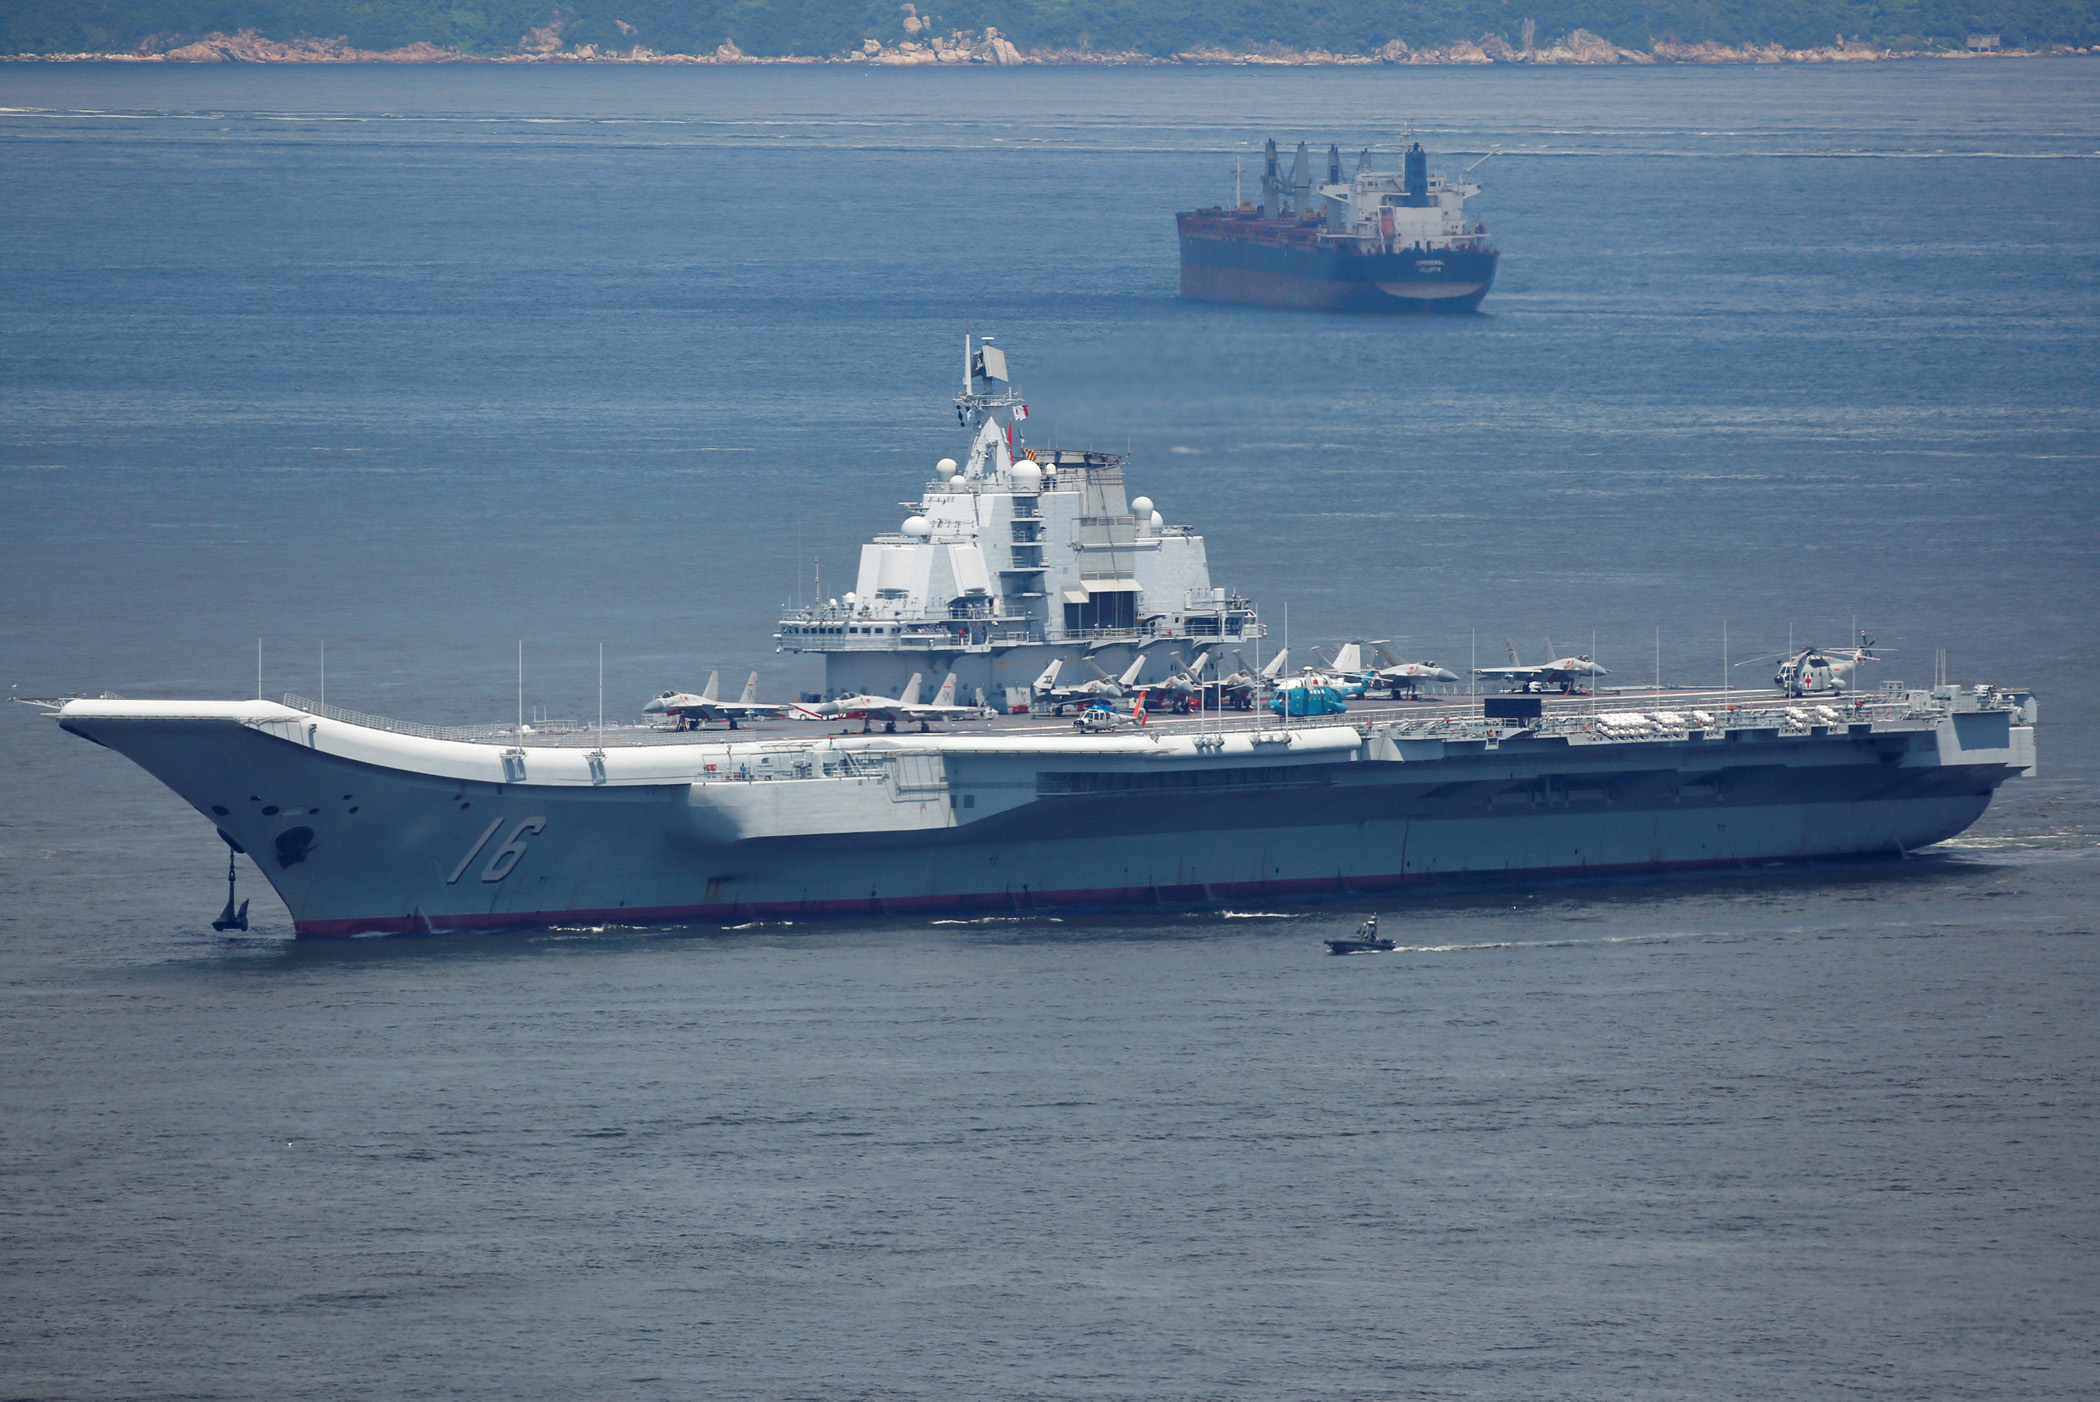 China Has An Aircraft Carrier – But No Jets to Train Pilots | The ...